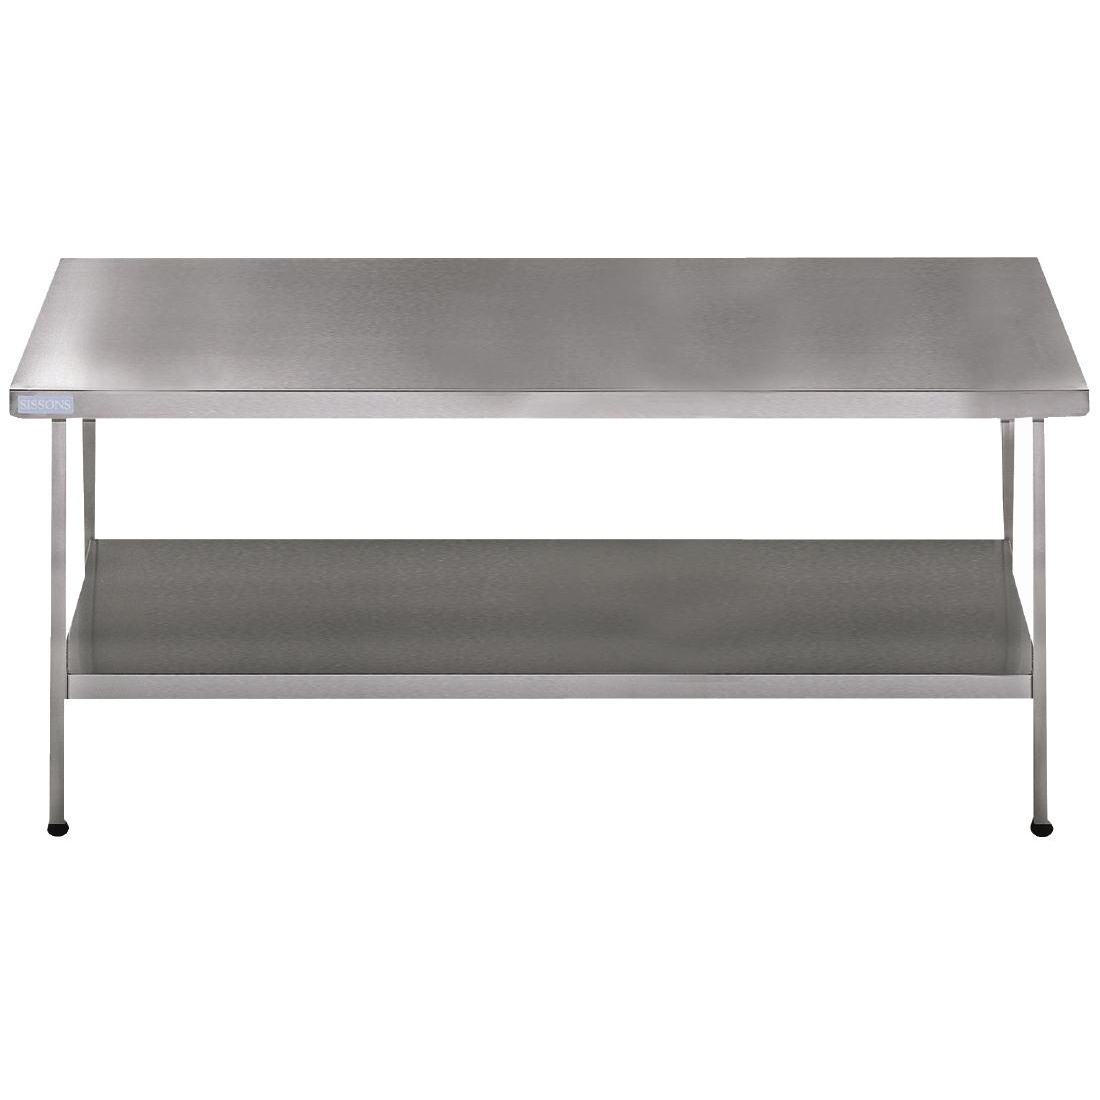 Franke Sissons Stainless Steel Centre Table 1200x650mm